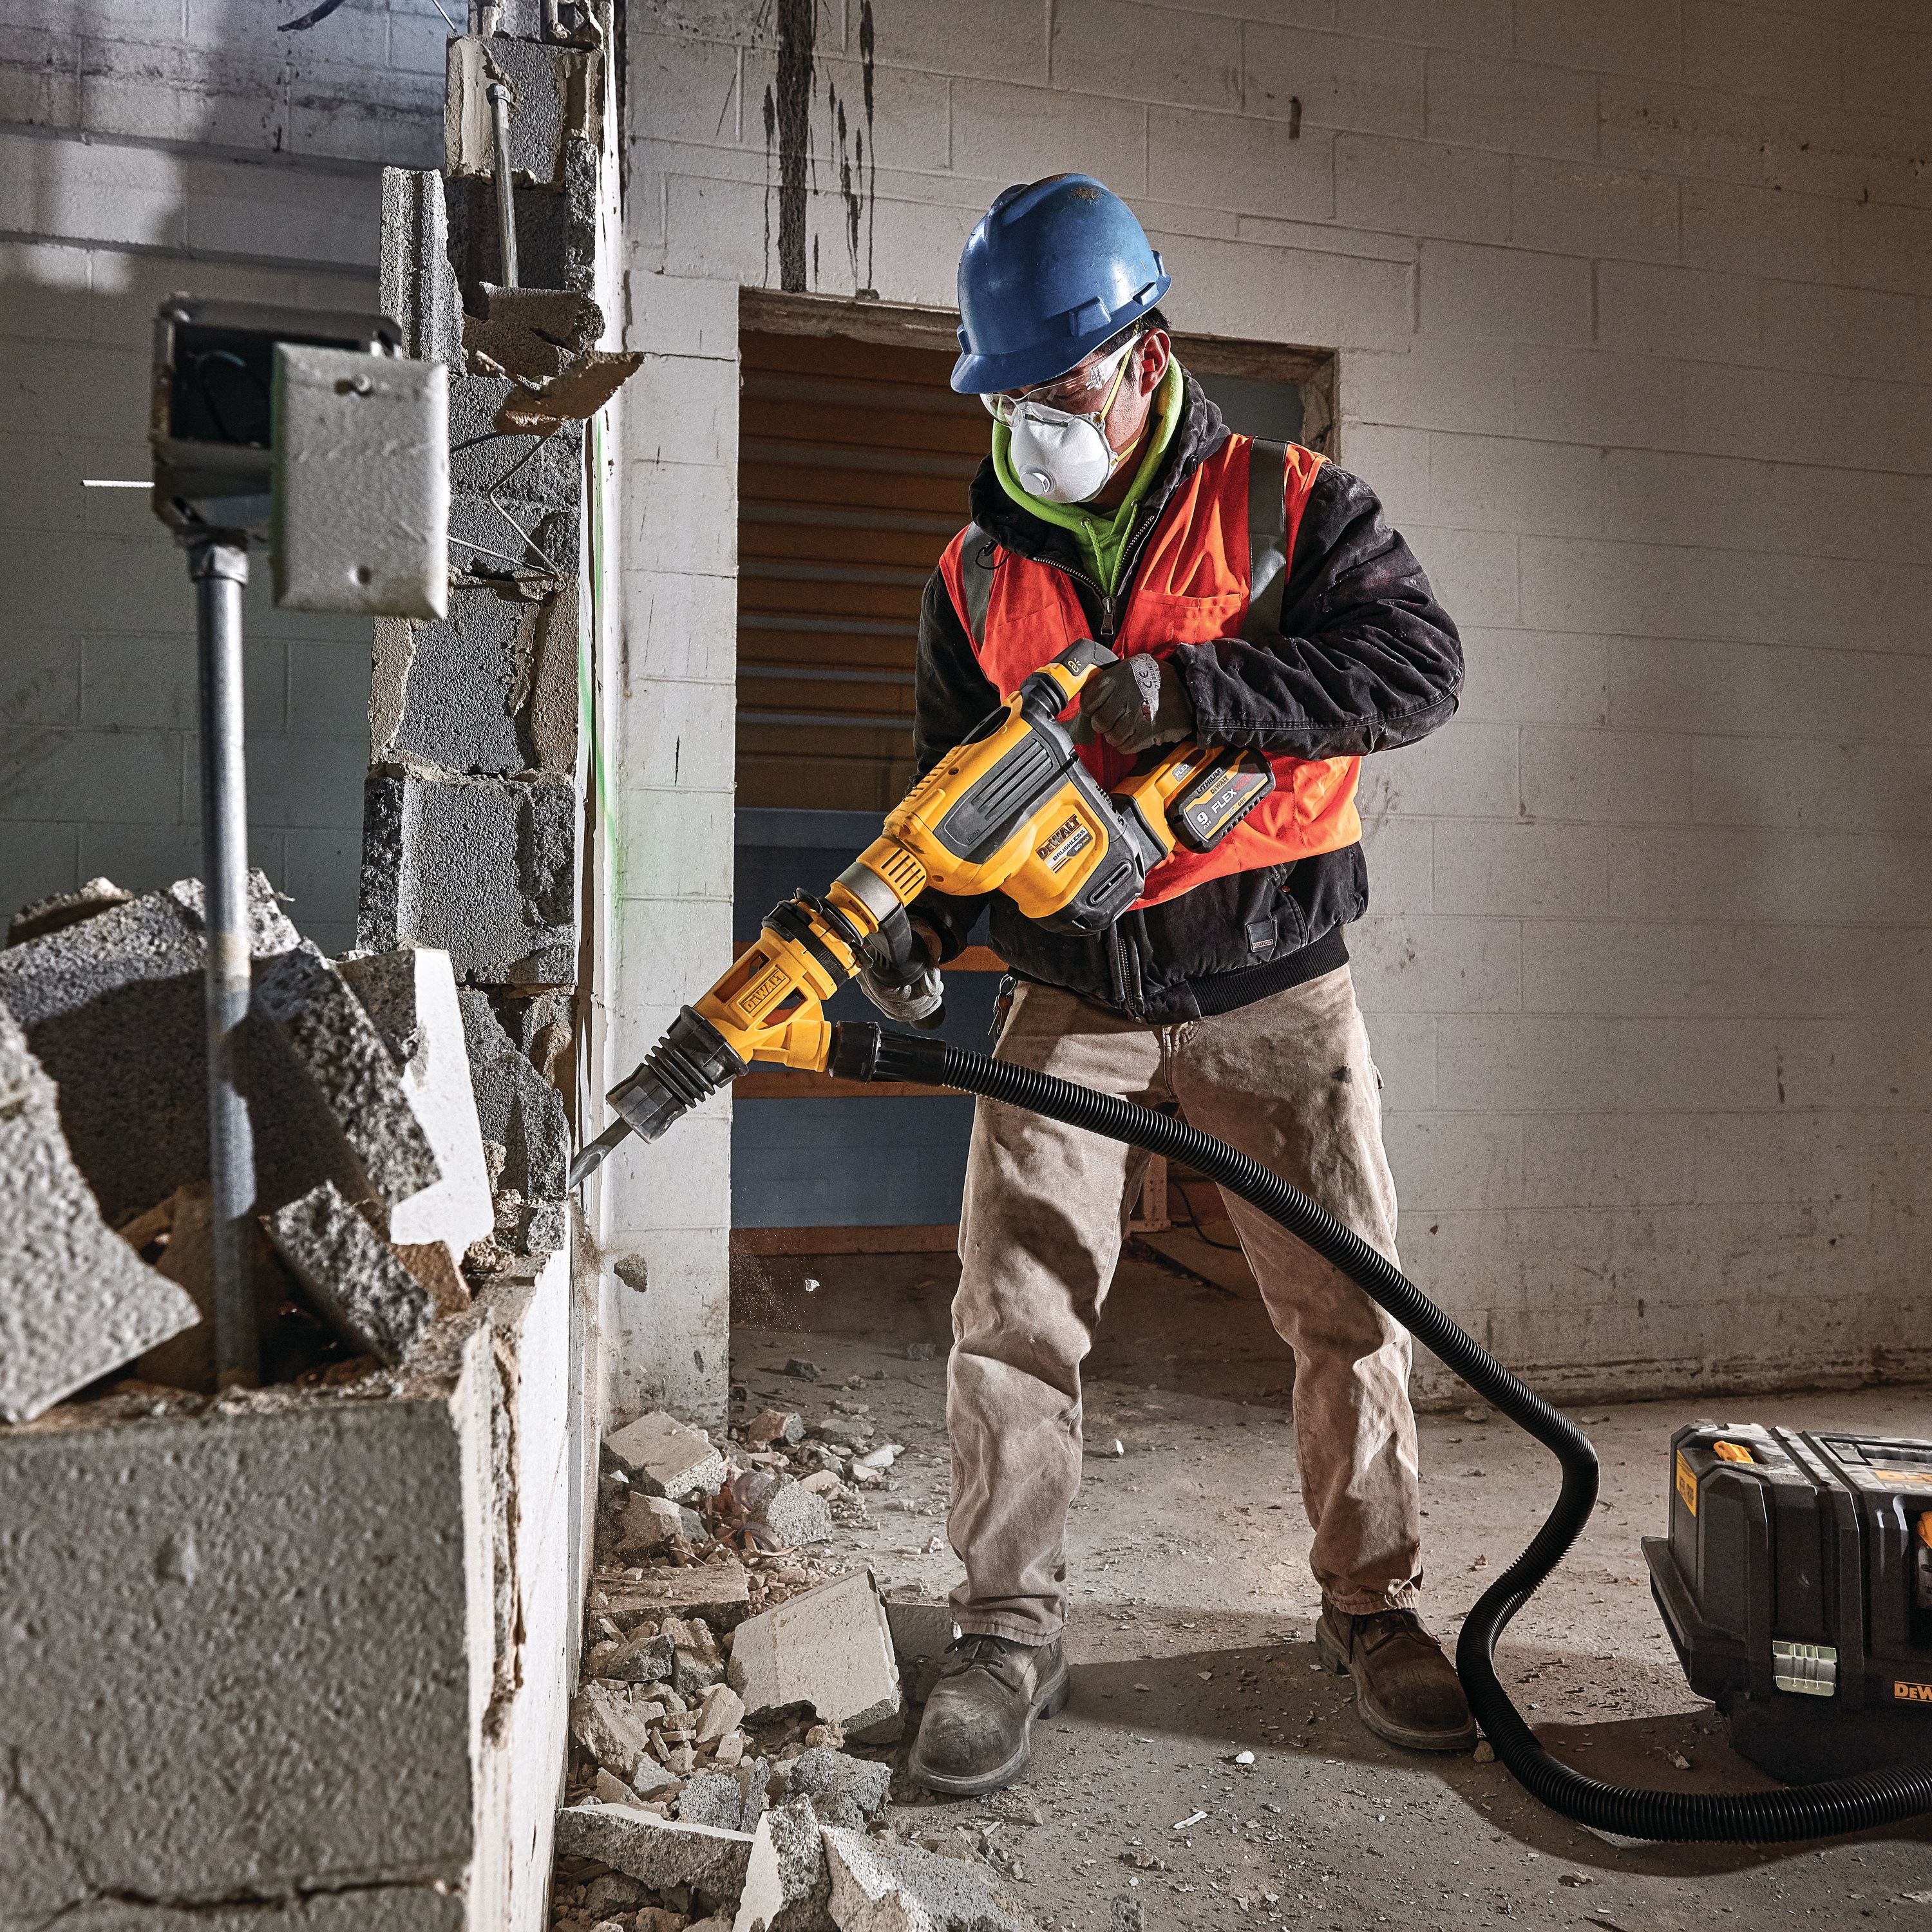 Demolition hammer dust shroud chiseling being used by a person to chisel. 